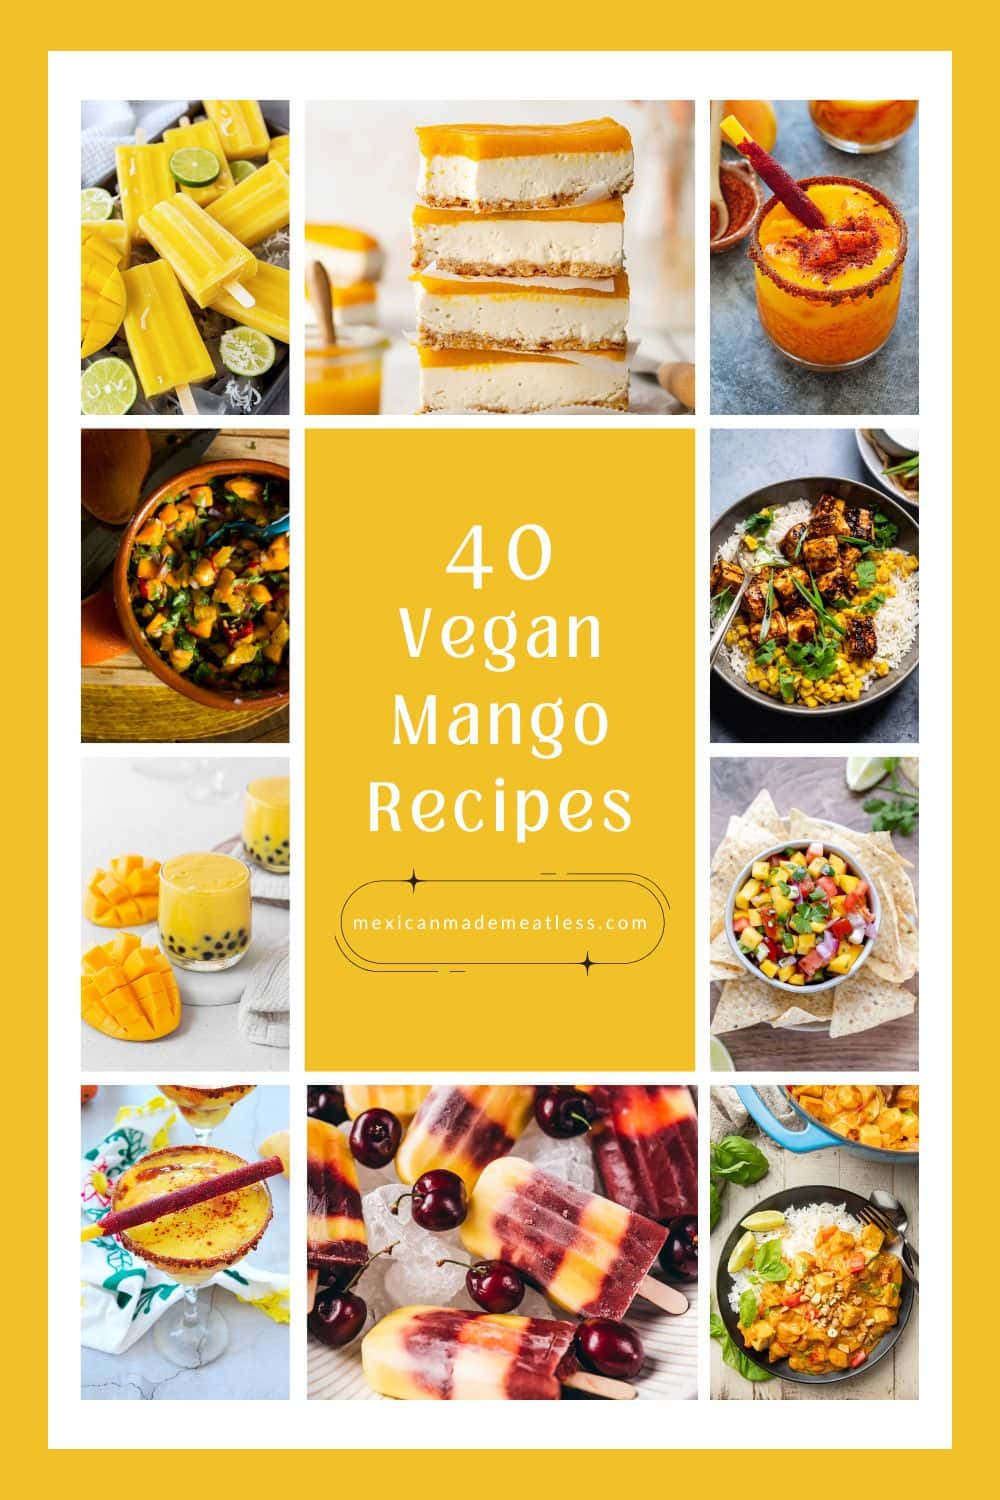 A collage showing ten different pictures of vegan mango recipes.